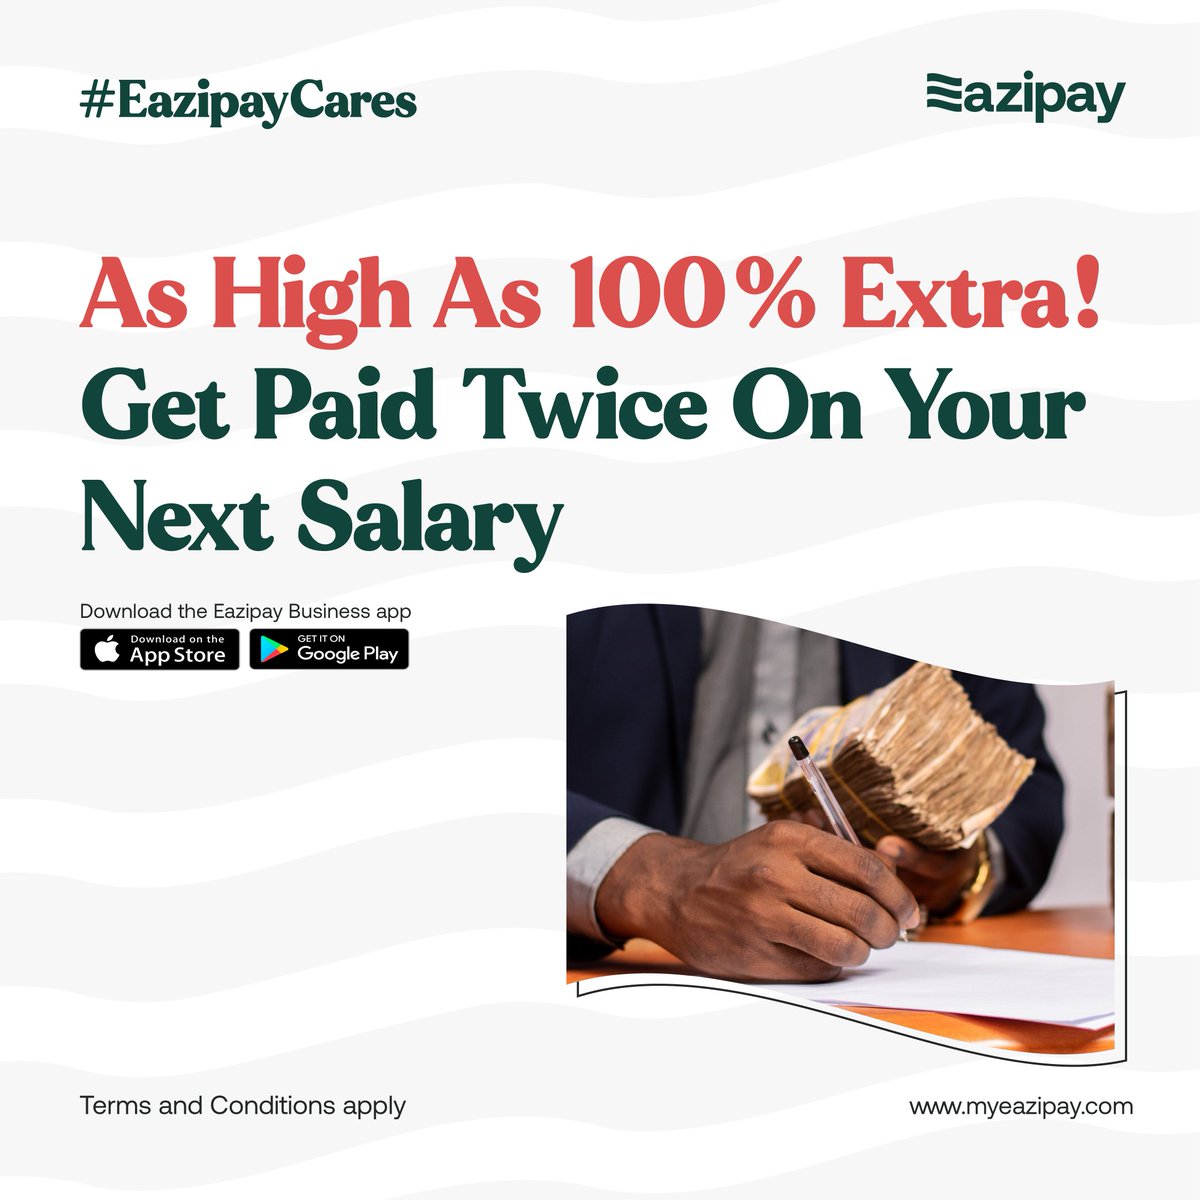 Don't miss out on the chance to earn some extra cash this month. Visit myeazipay.com to learn how to make up to 100% extra on your salary. It might just be the perfect Workers Day gift for you!

#EazipayCares #WorkersDay #PayrollMadeEasy #BusinessSupport